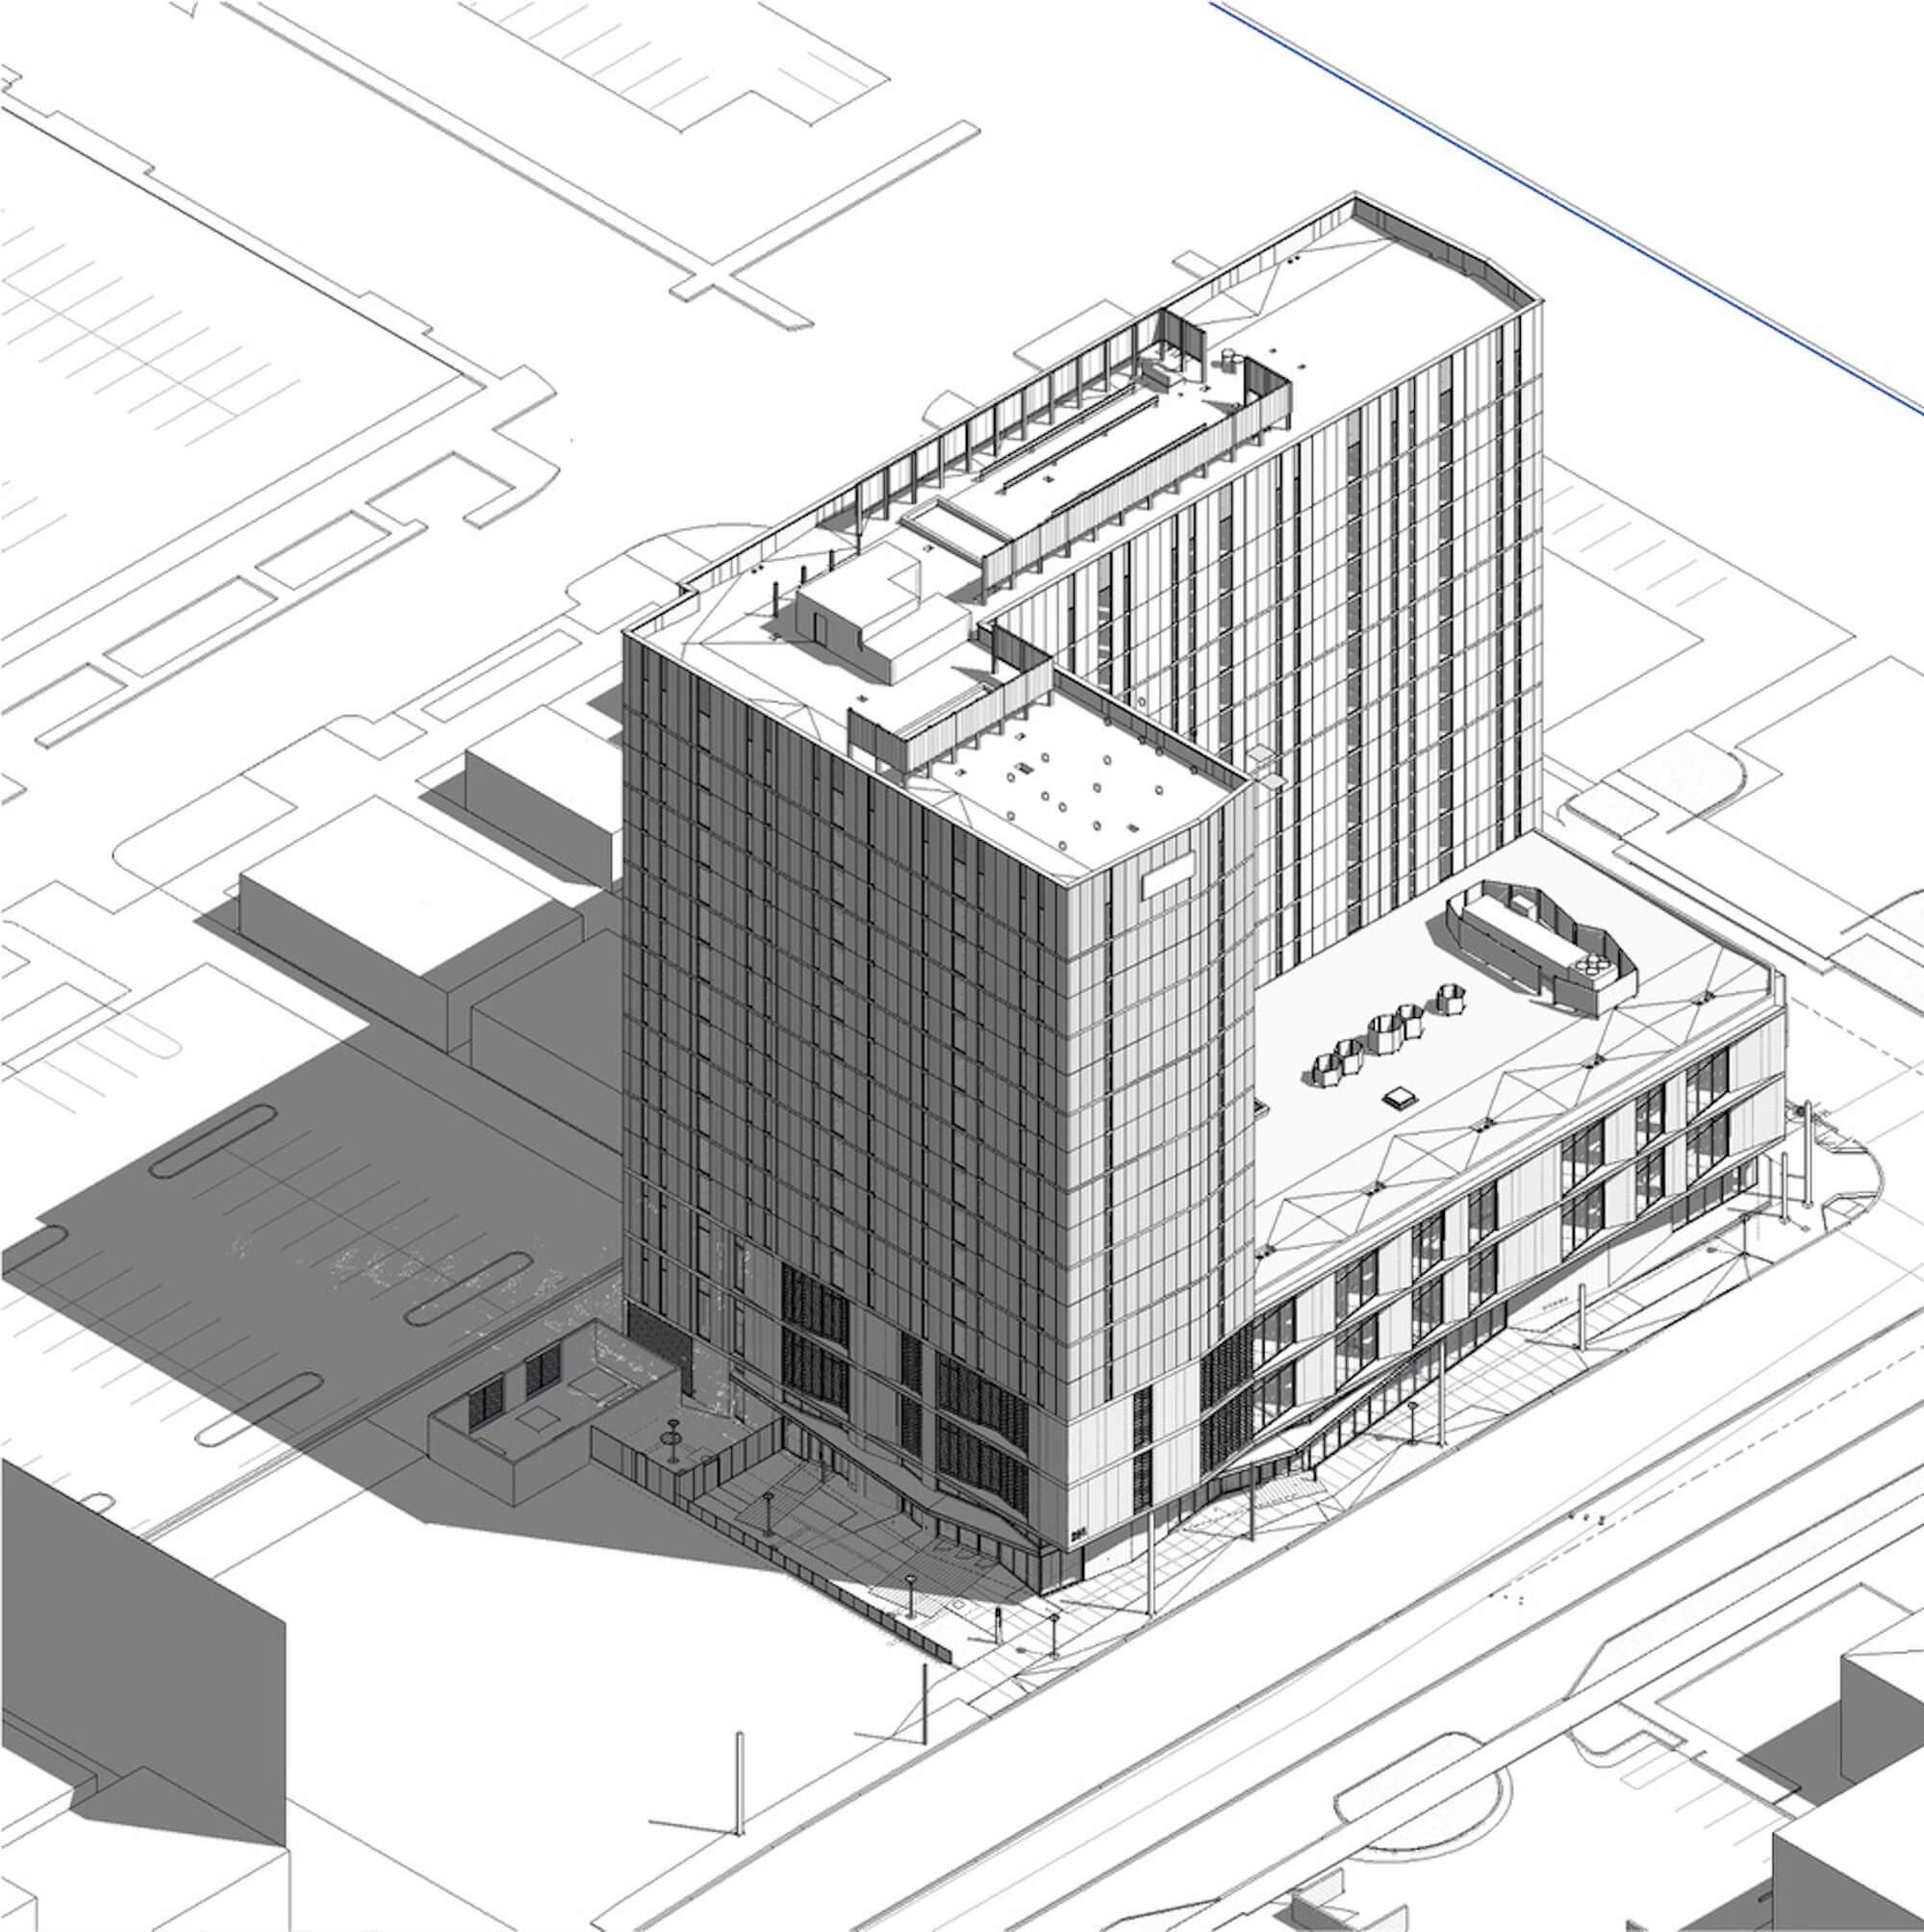 architectural axonometric drawing of the 16 story L shaped residence hall with 3 story setback